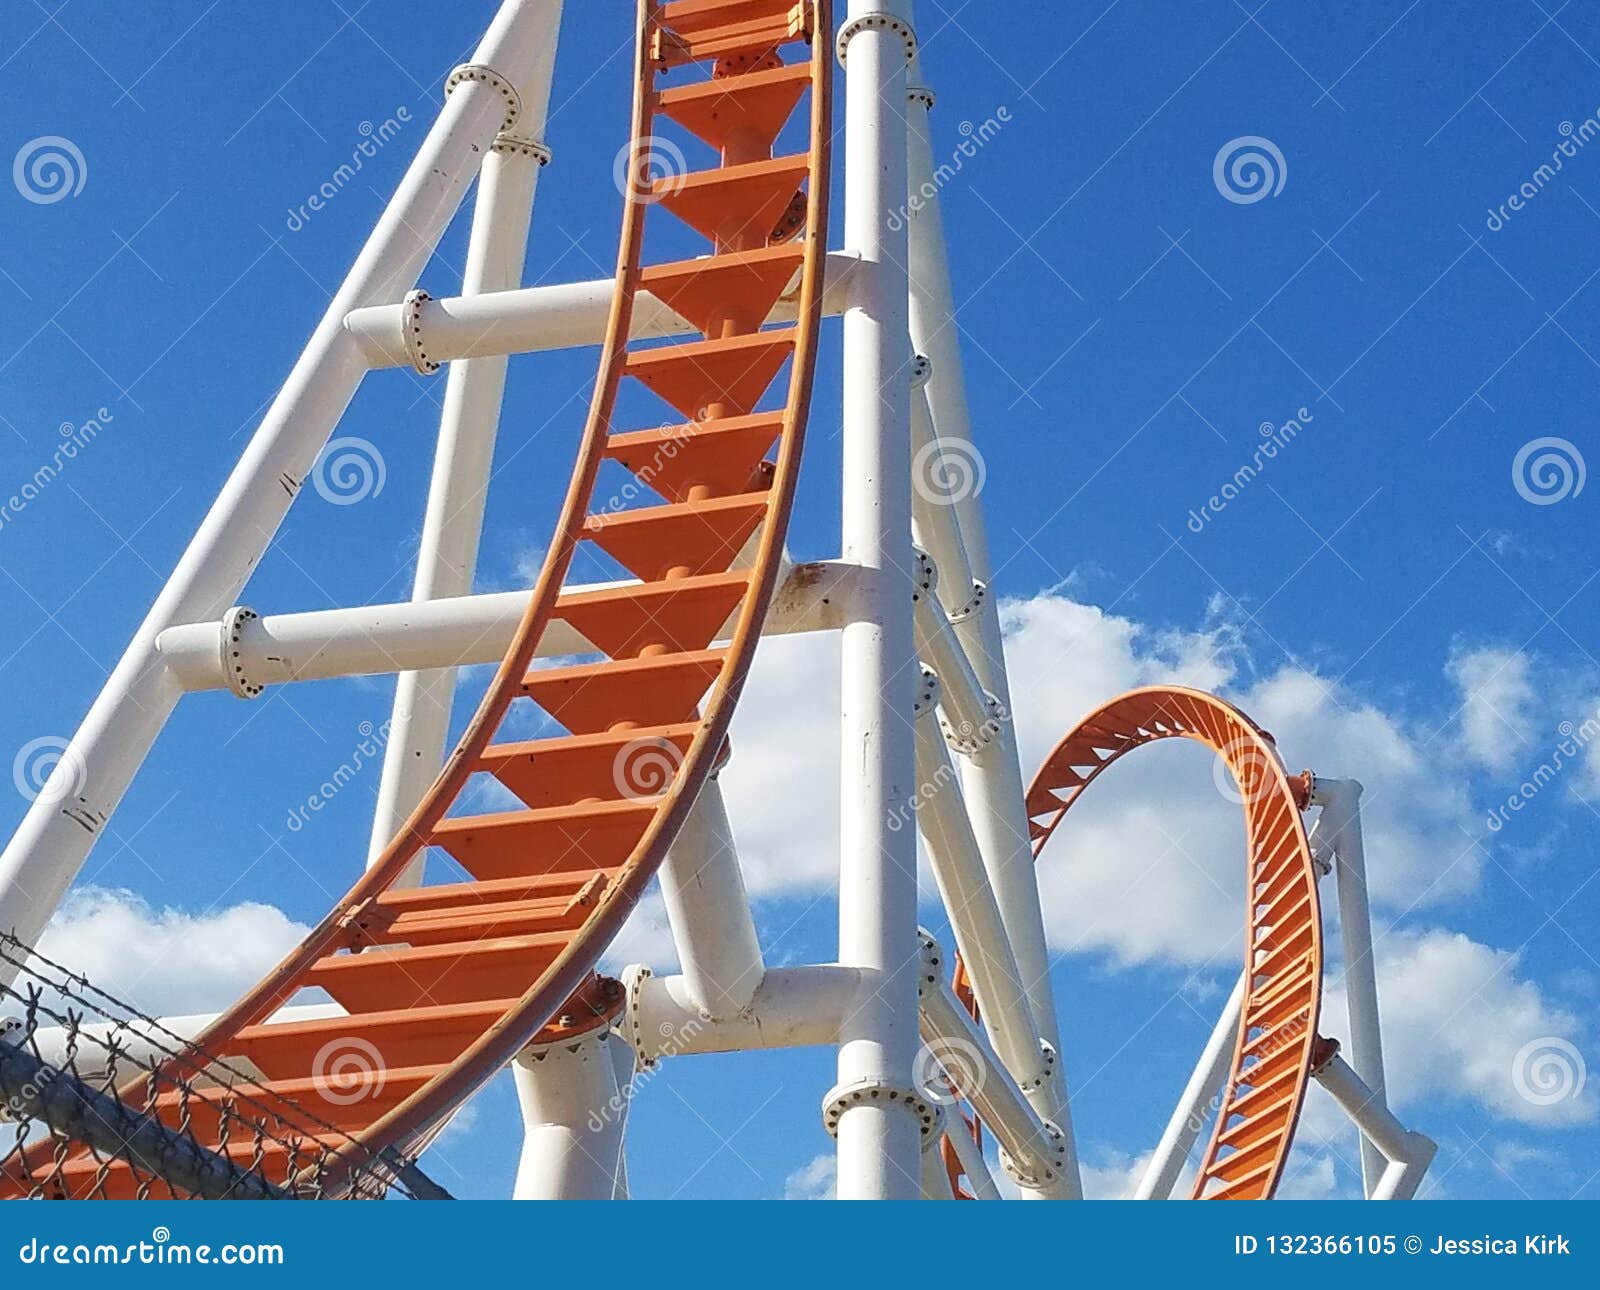 Coaster Twisting Photos Free Royalty Free Stock Photos From Dreamstime